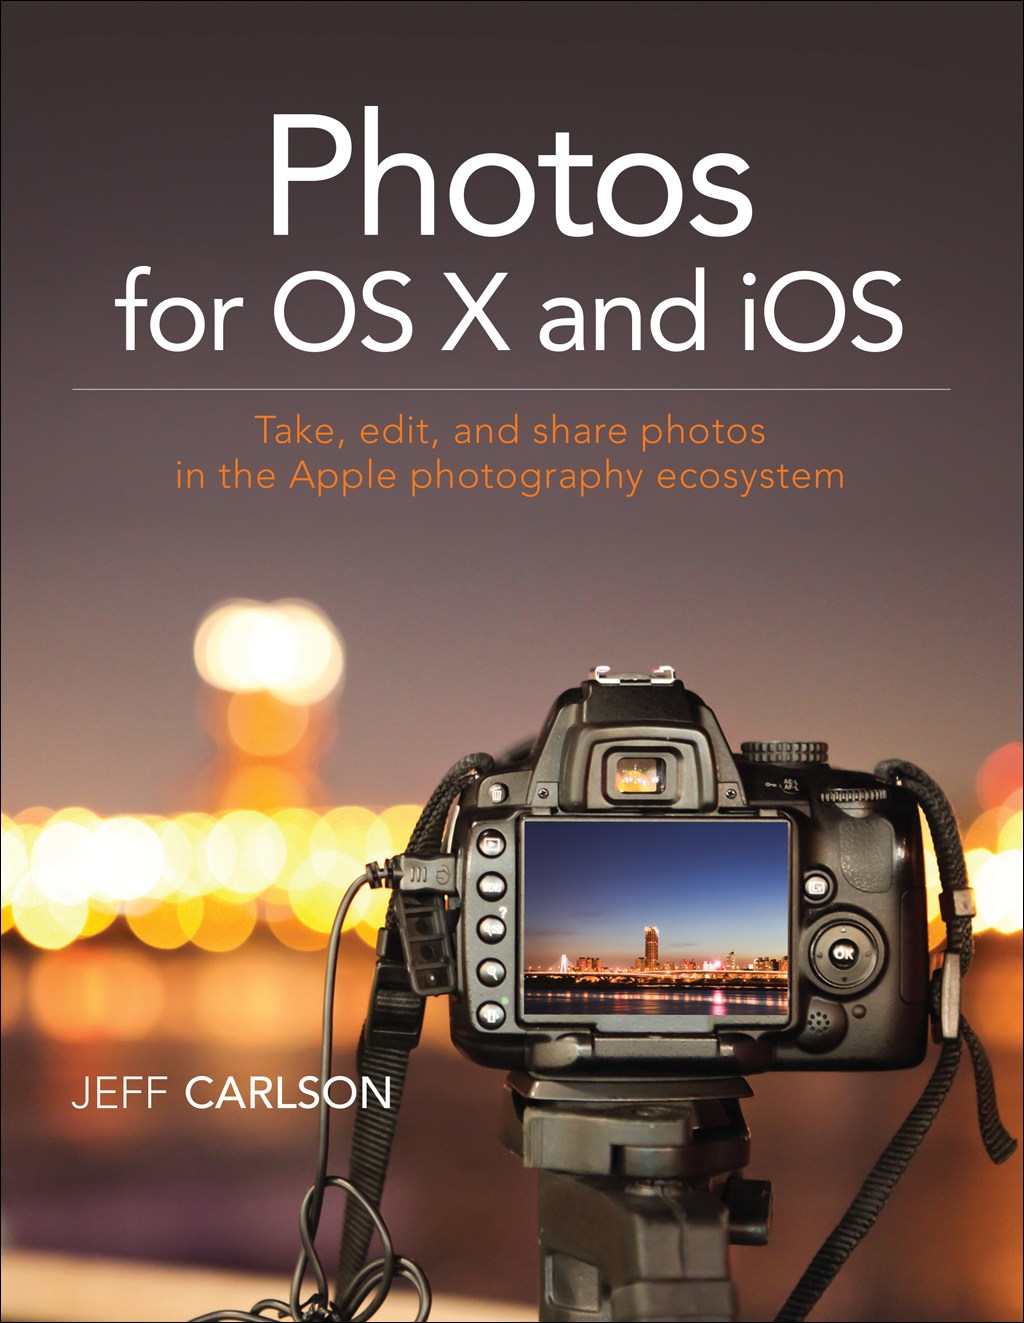 Photos for OS X and iOS: Take, edit, and share photos in the Apple photography ecosystem